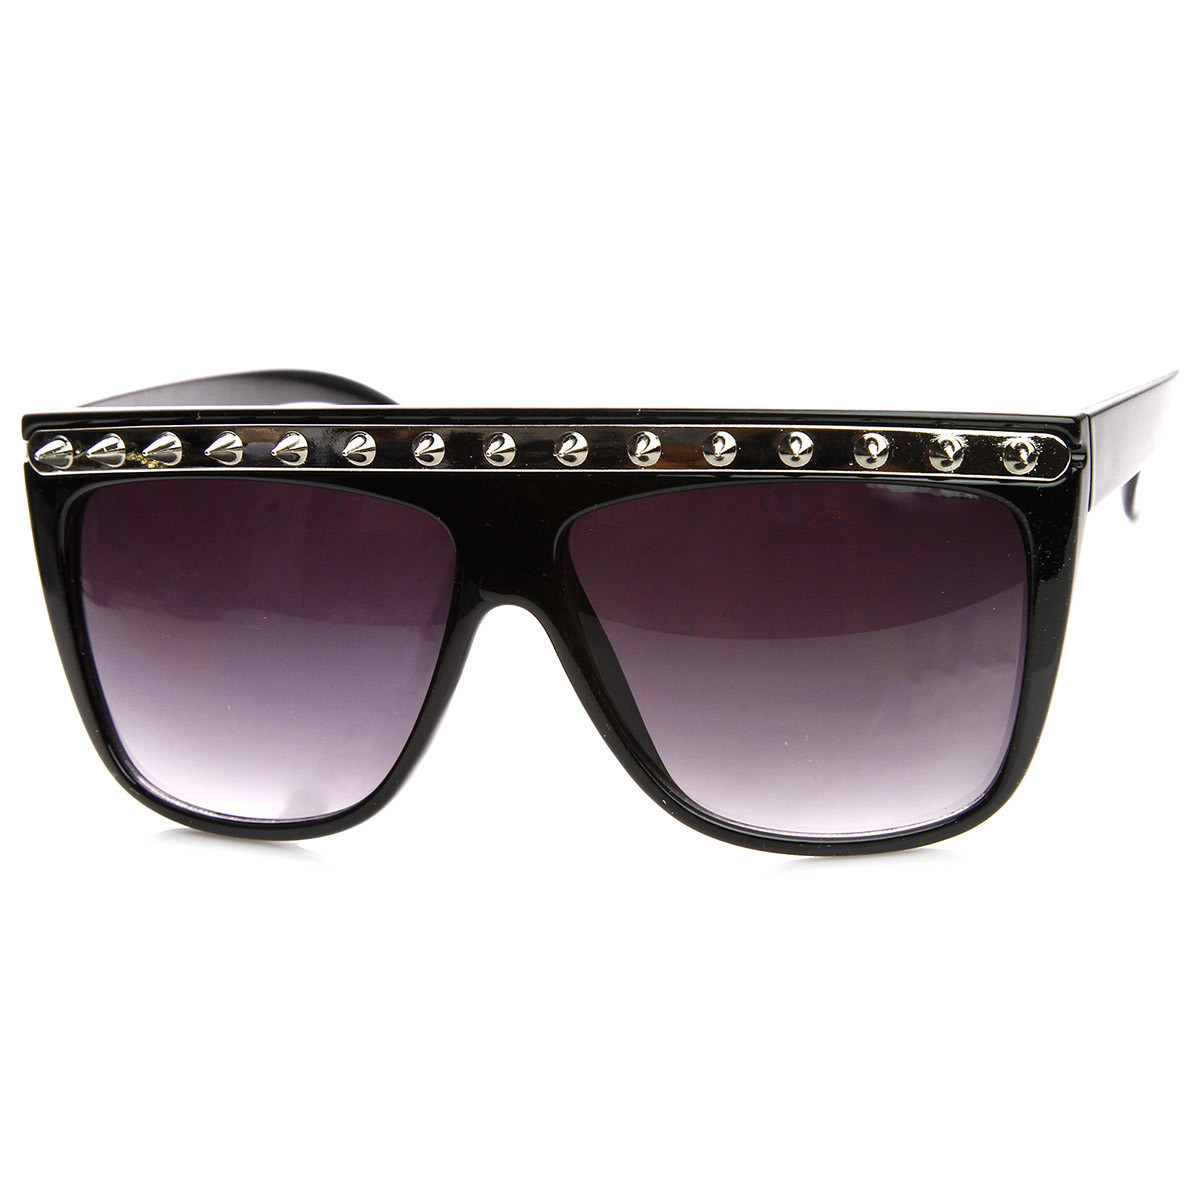 Spiked Fashion Metal Accent Flat Top Horned Rim Sunglasses - 8931 - Tortoise-Gold